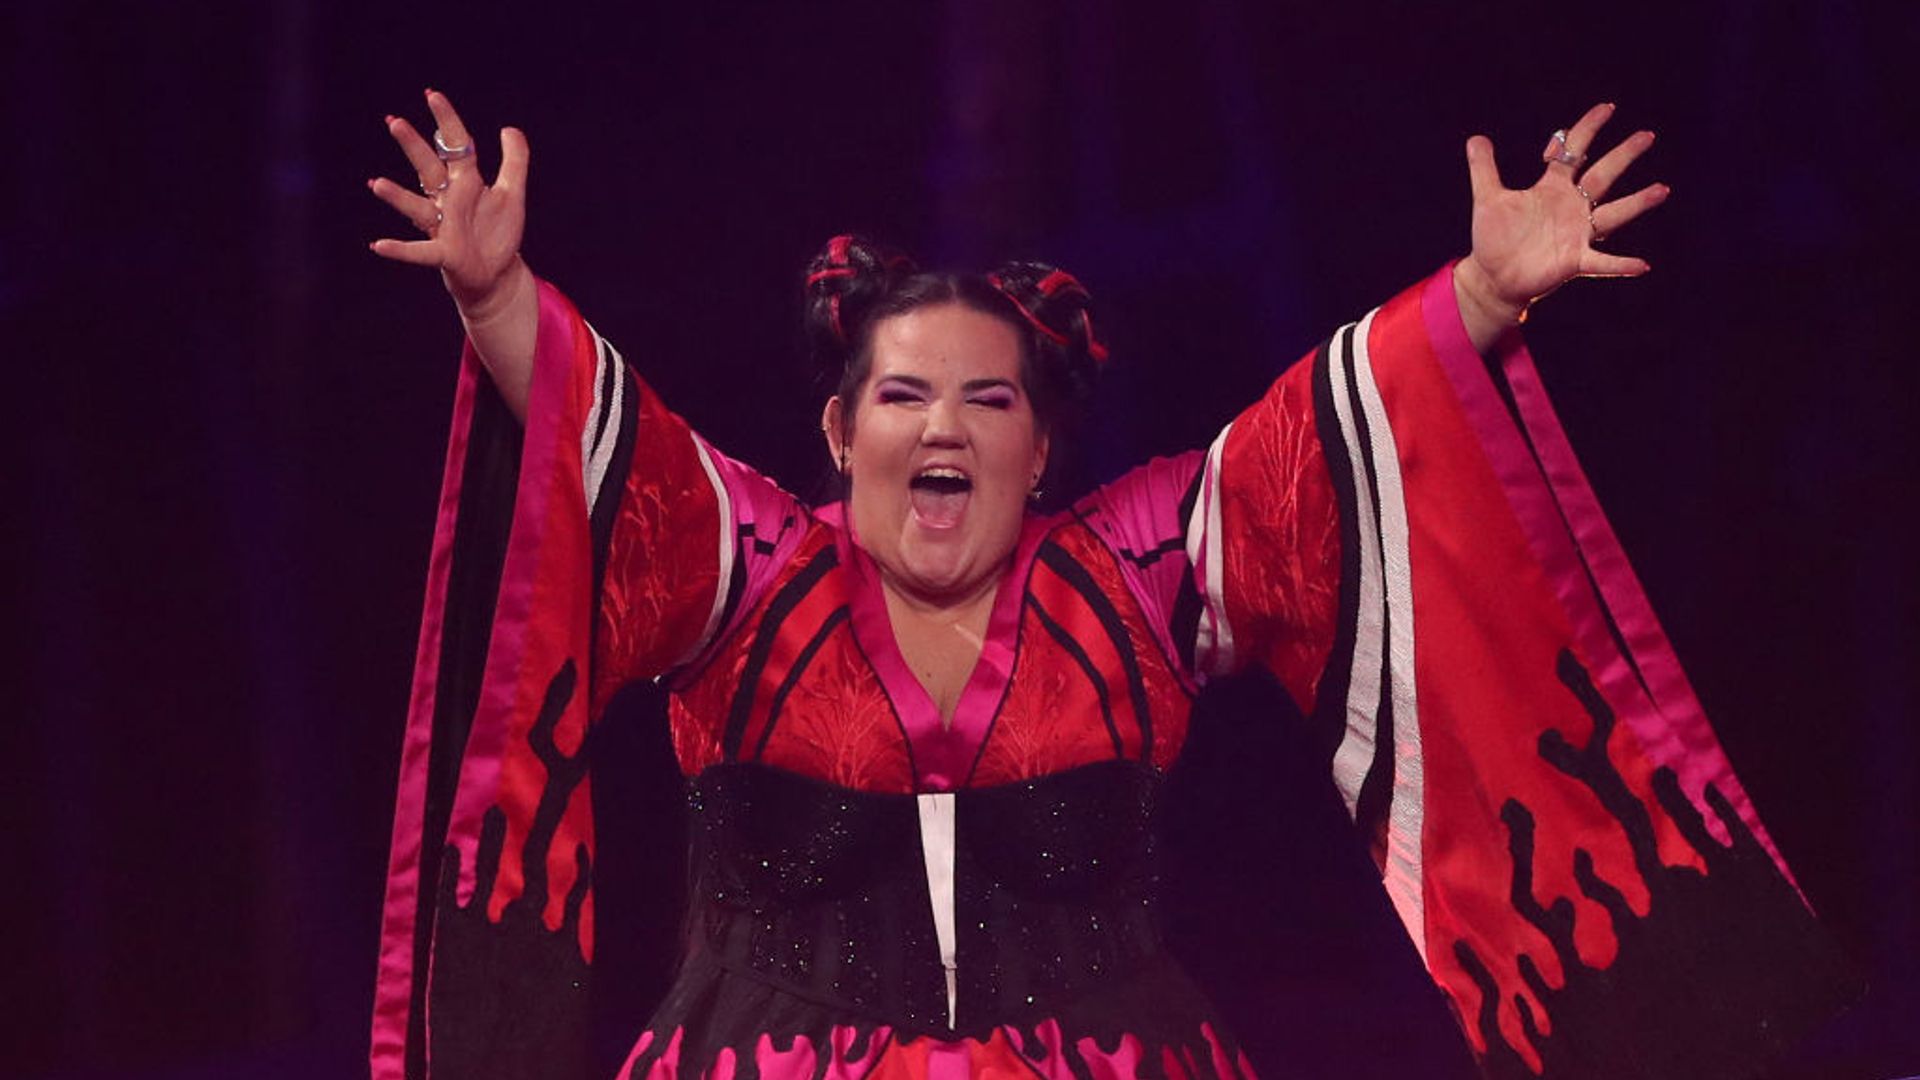 Netta of Israel celebrated winning the 2018 Eurovision Song Contest Grand Final